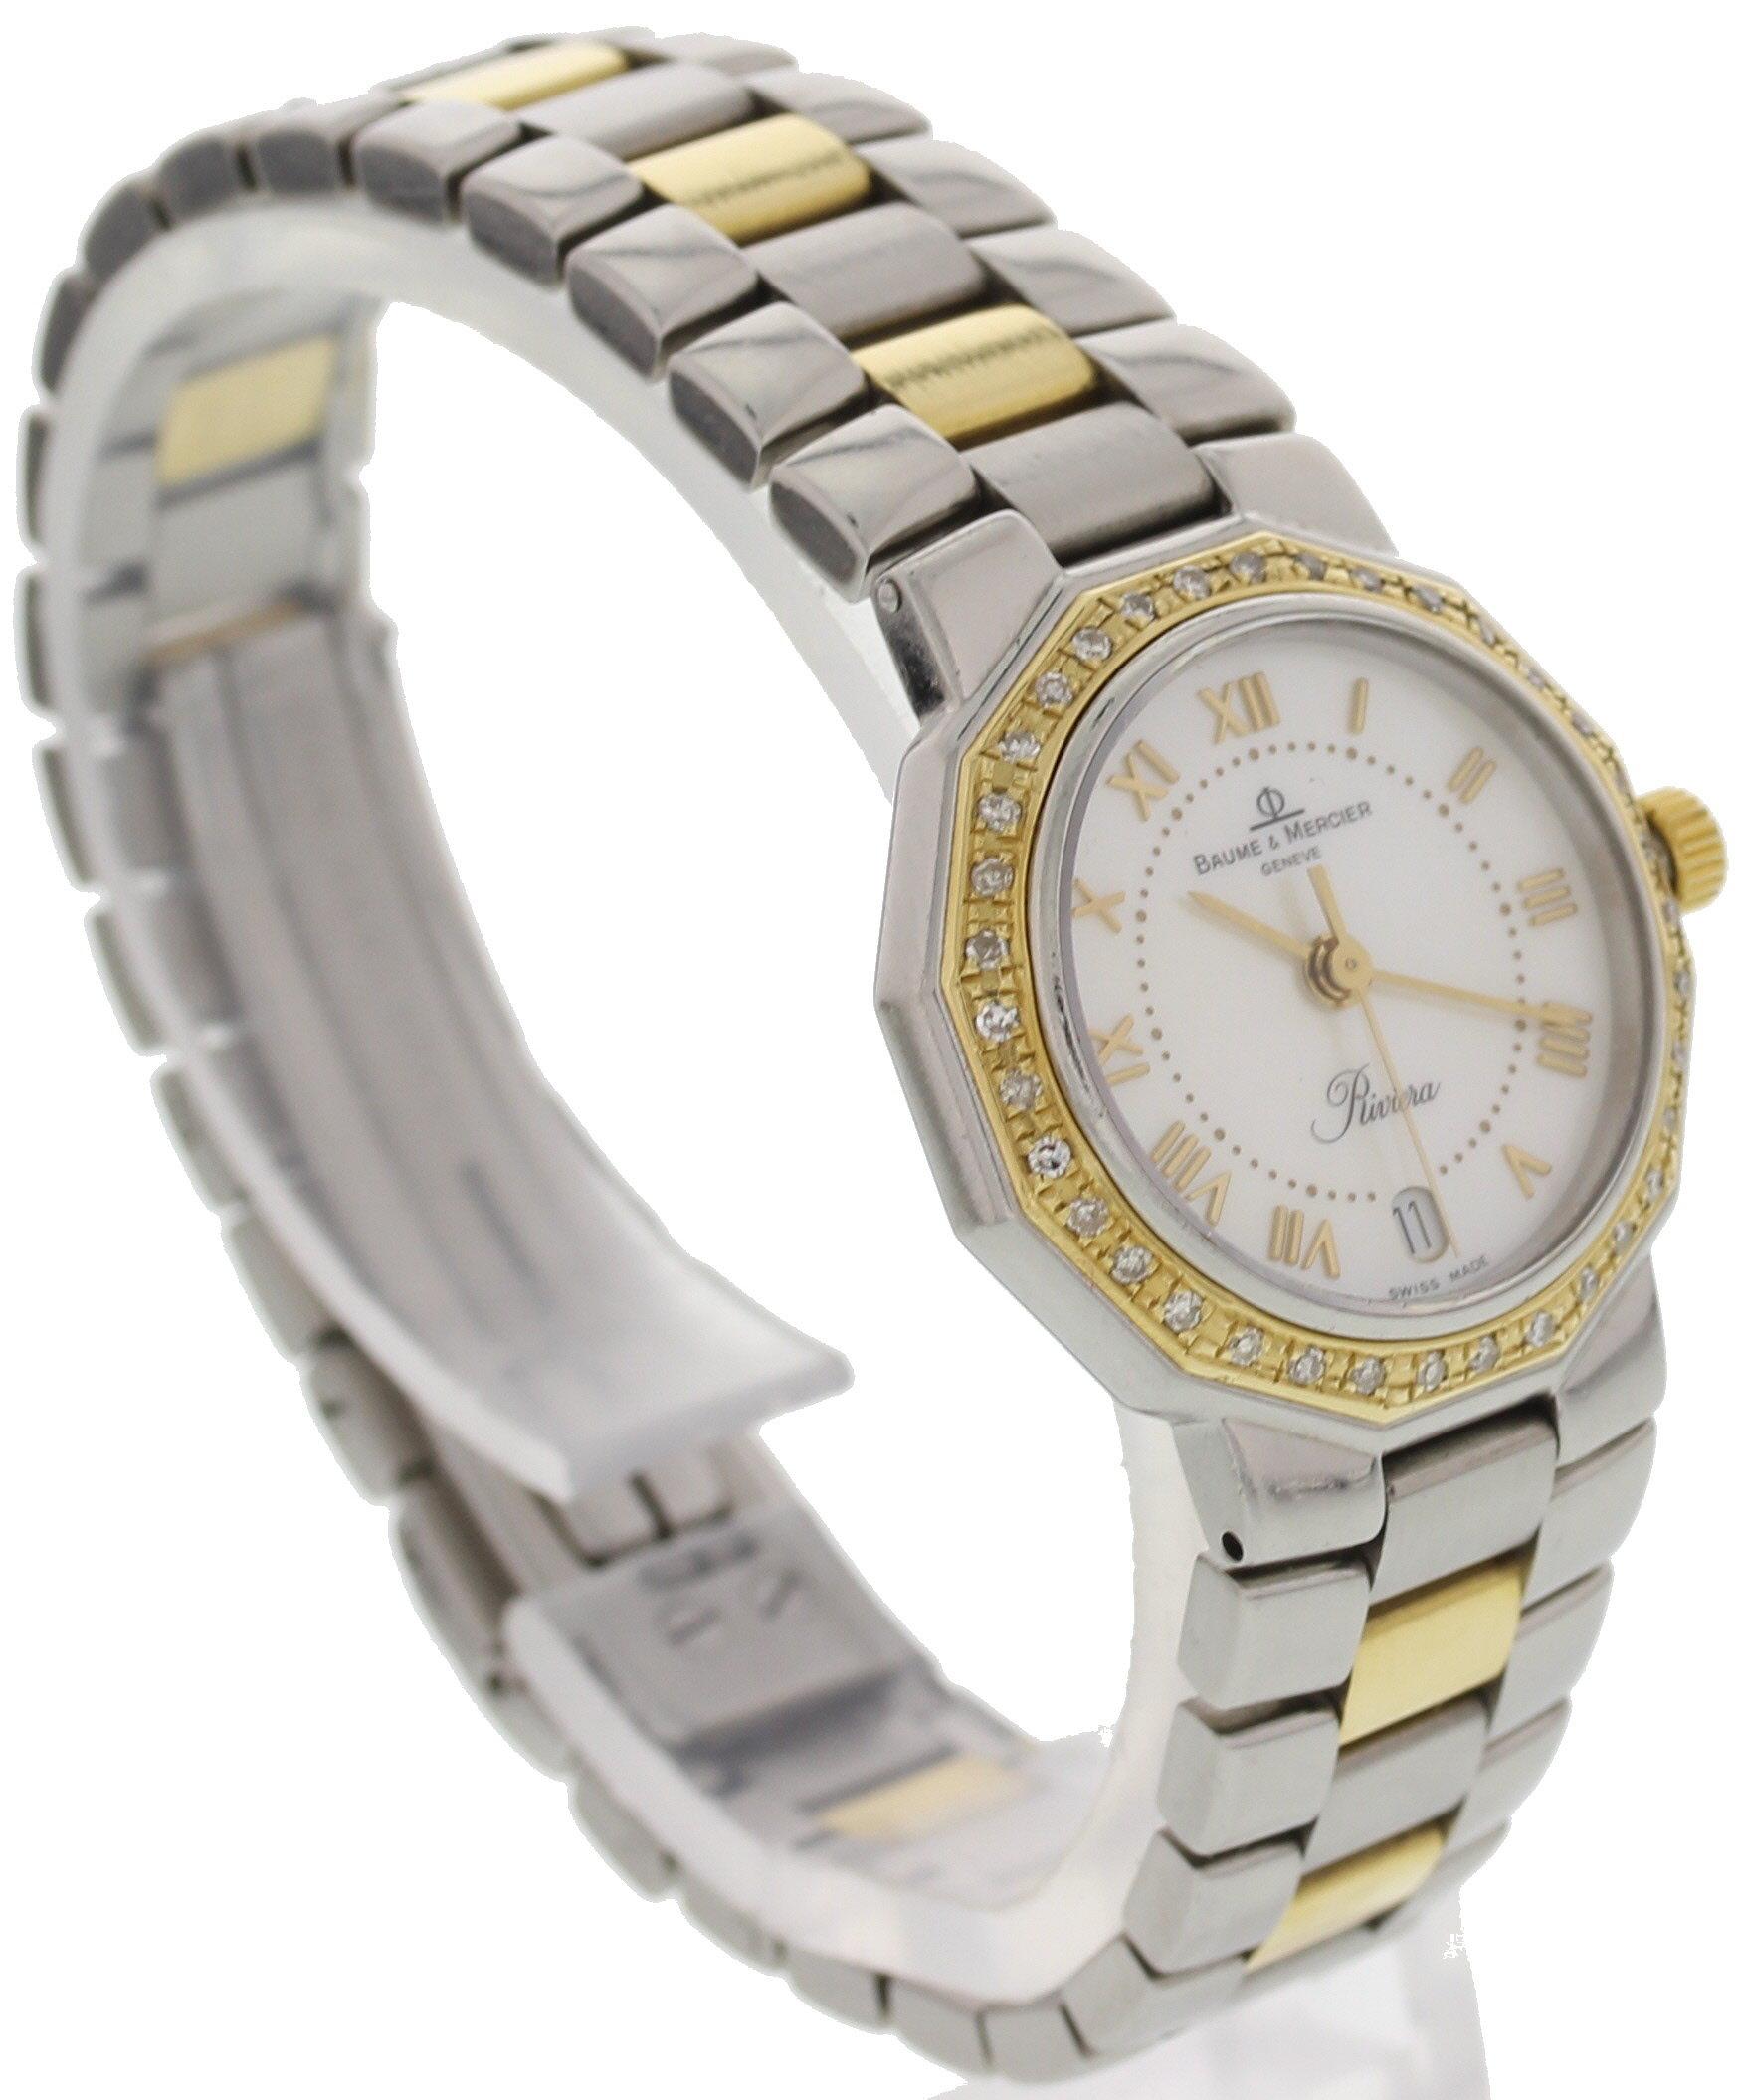 Ladies Baume & Mercier Riviera. 25 mm stainless steel case. 18k yellow gold and diamond bezel. Mother of pearl dial with gold hands and Roman numerals. 18k yellow gold and stainless steel bracelet with folding clasp; will fit up to a 6 inch wrist.